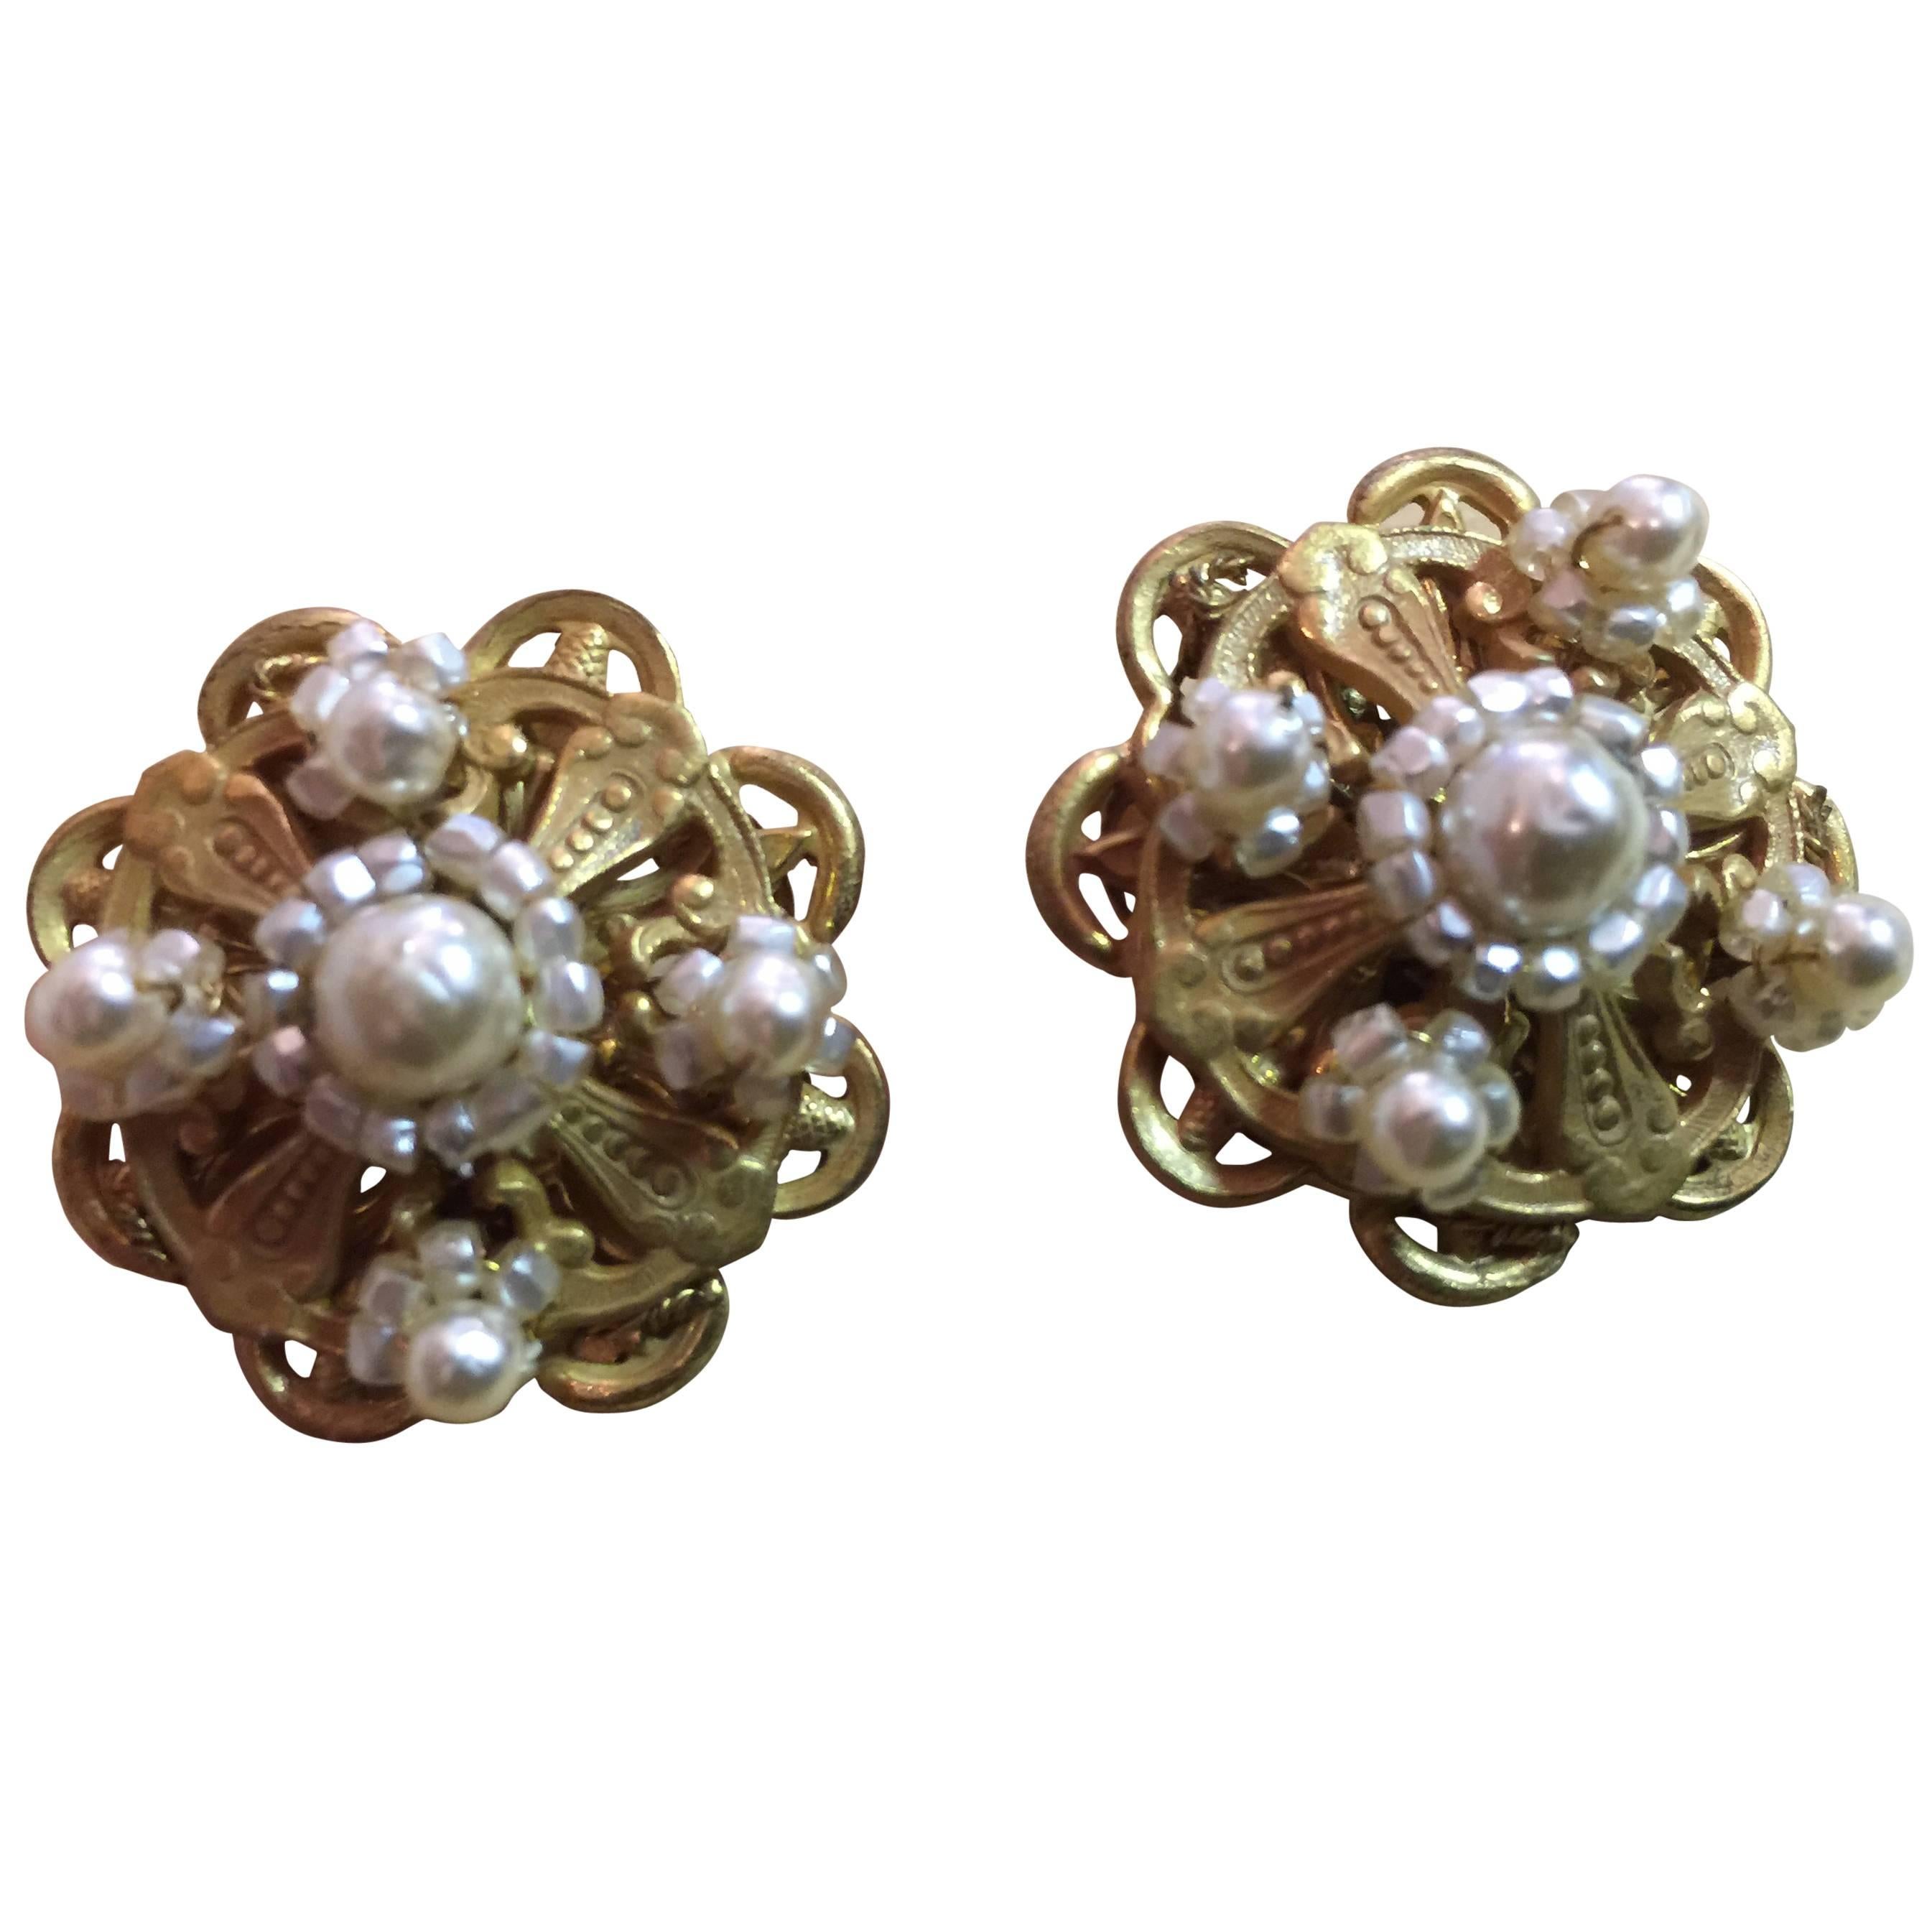 1960s MIRIAM HASKELL Baroque Seed Pearl and Goldtone Filigree Earrings For Sale